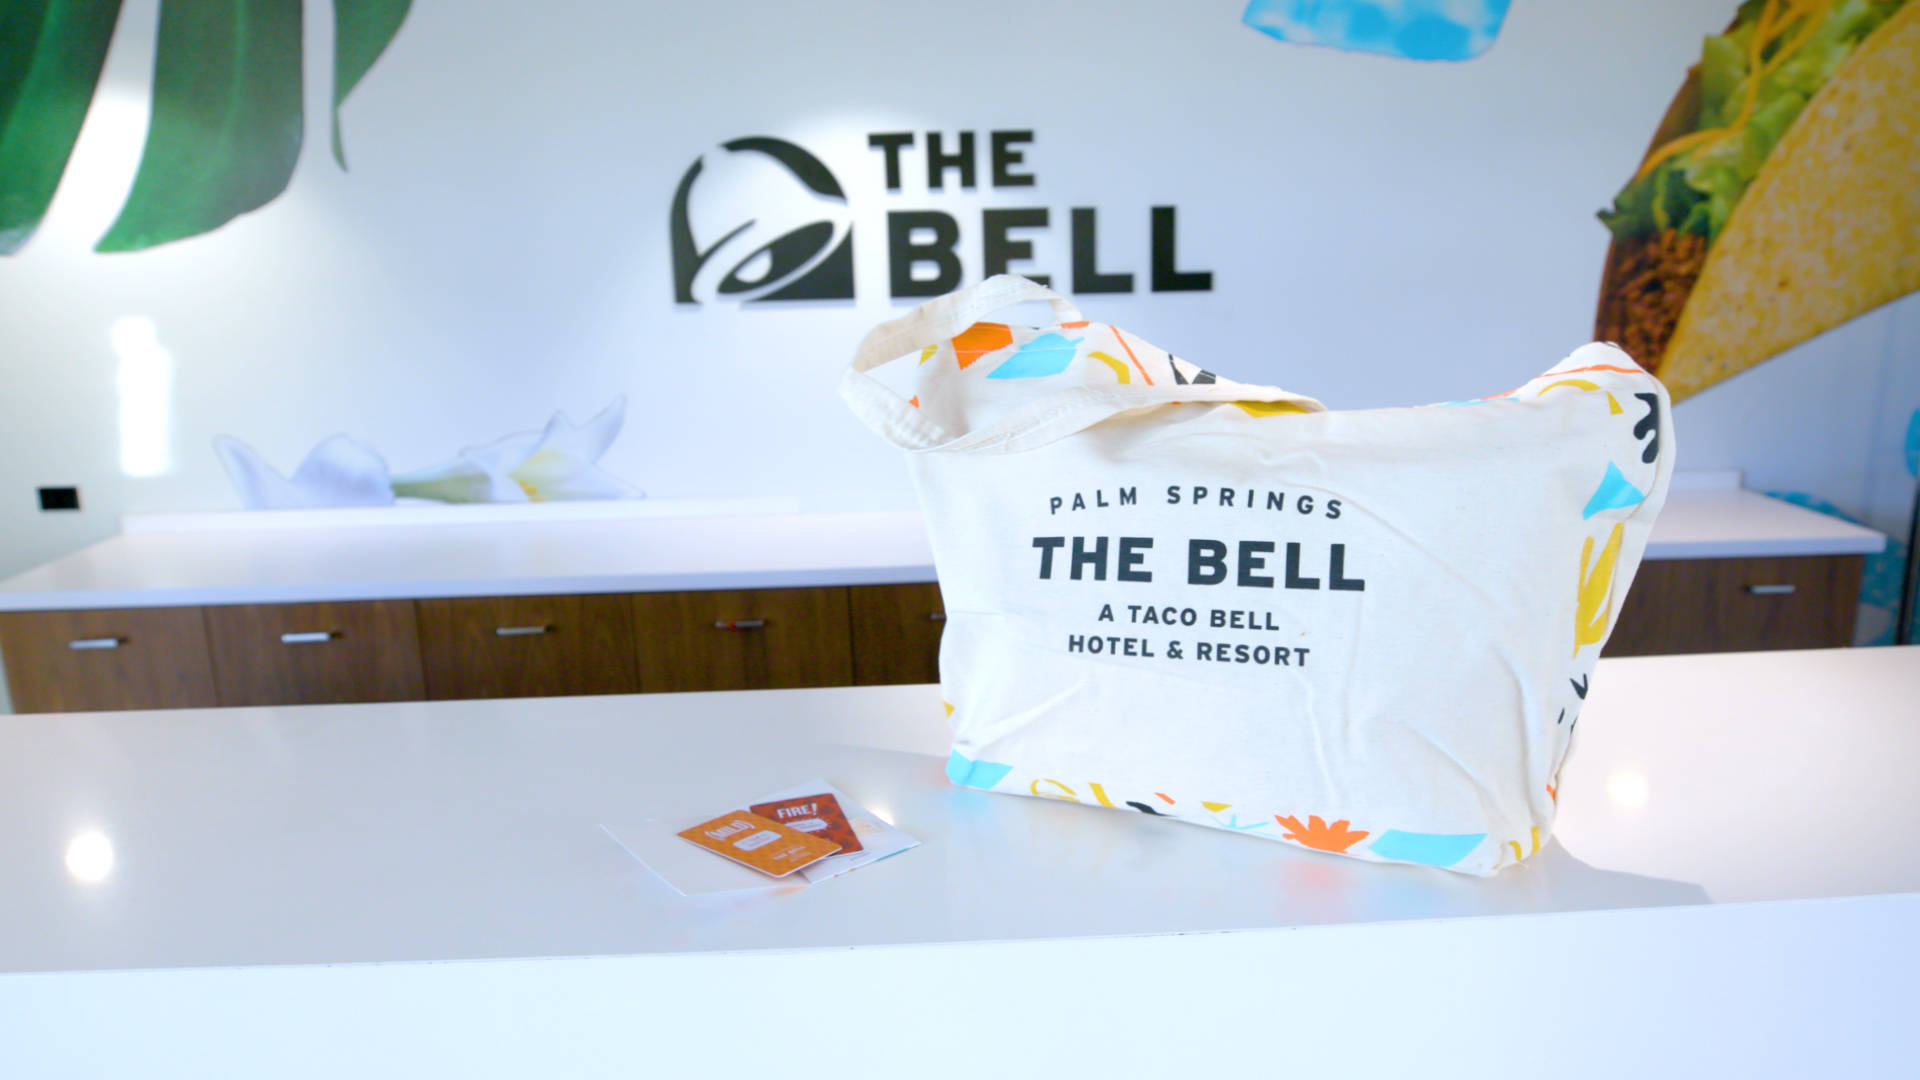 Taco Bell Hotel And Resort Background